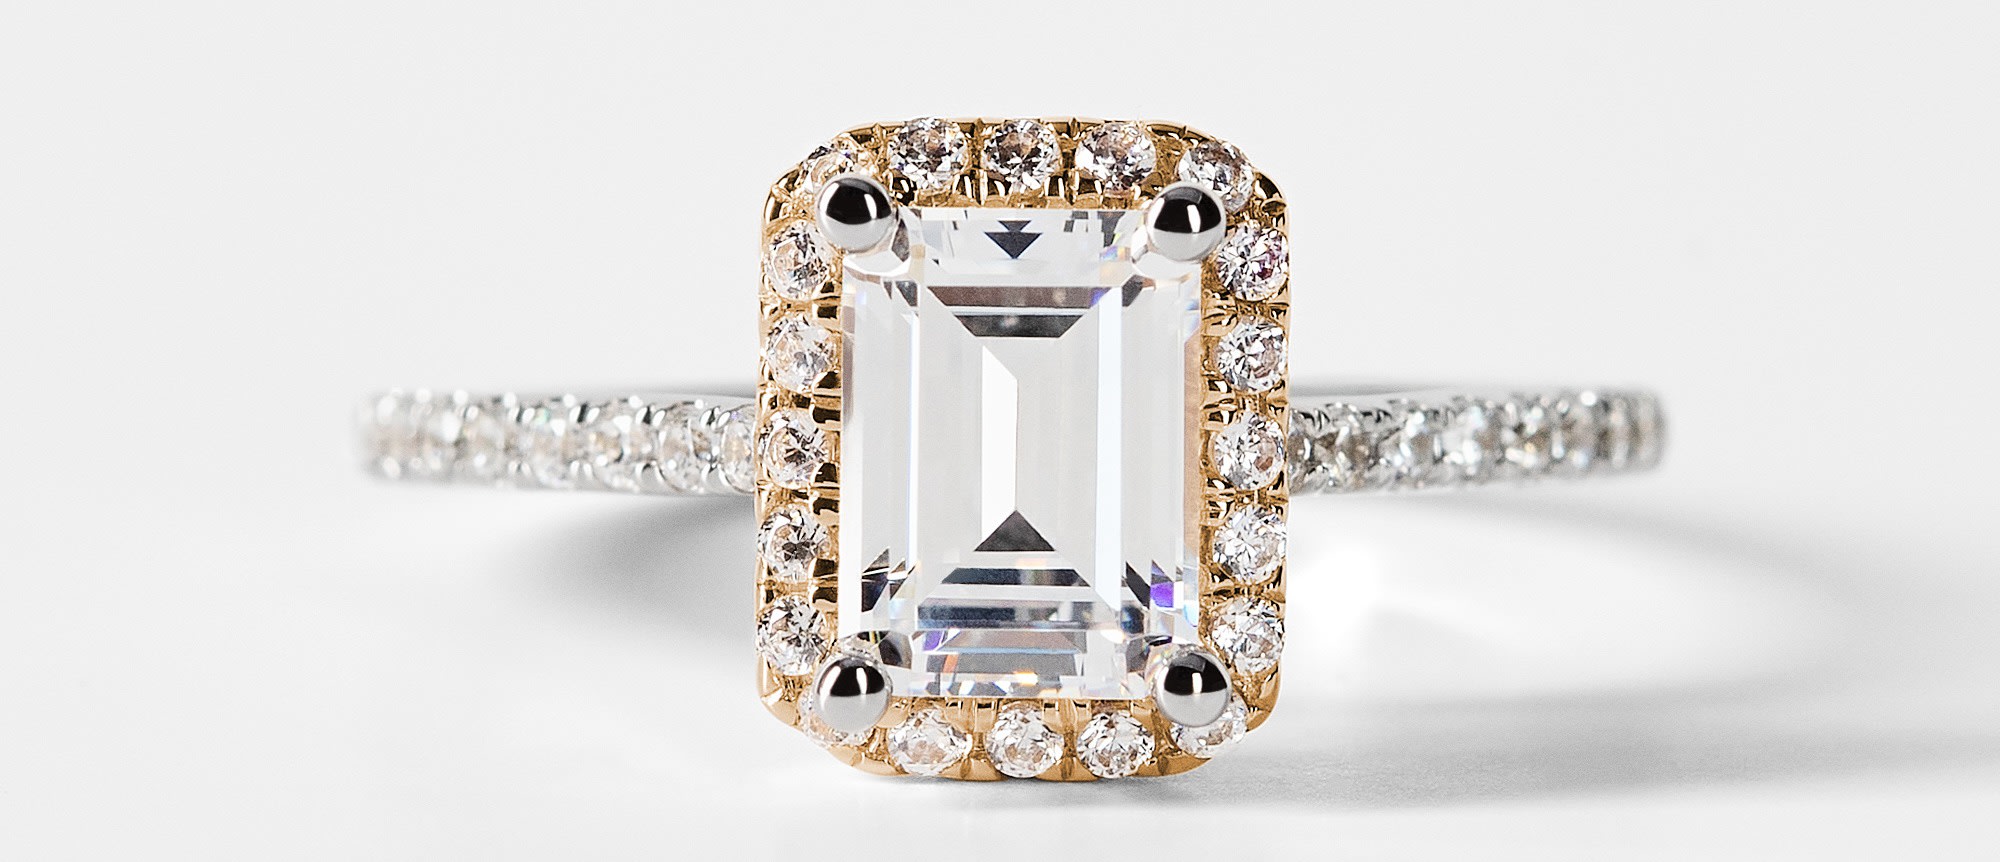 Helm Emerald Cut Engagement Ring in Two-Toned 18K White and Yellow Gold